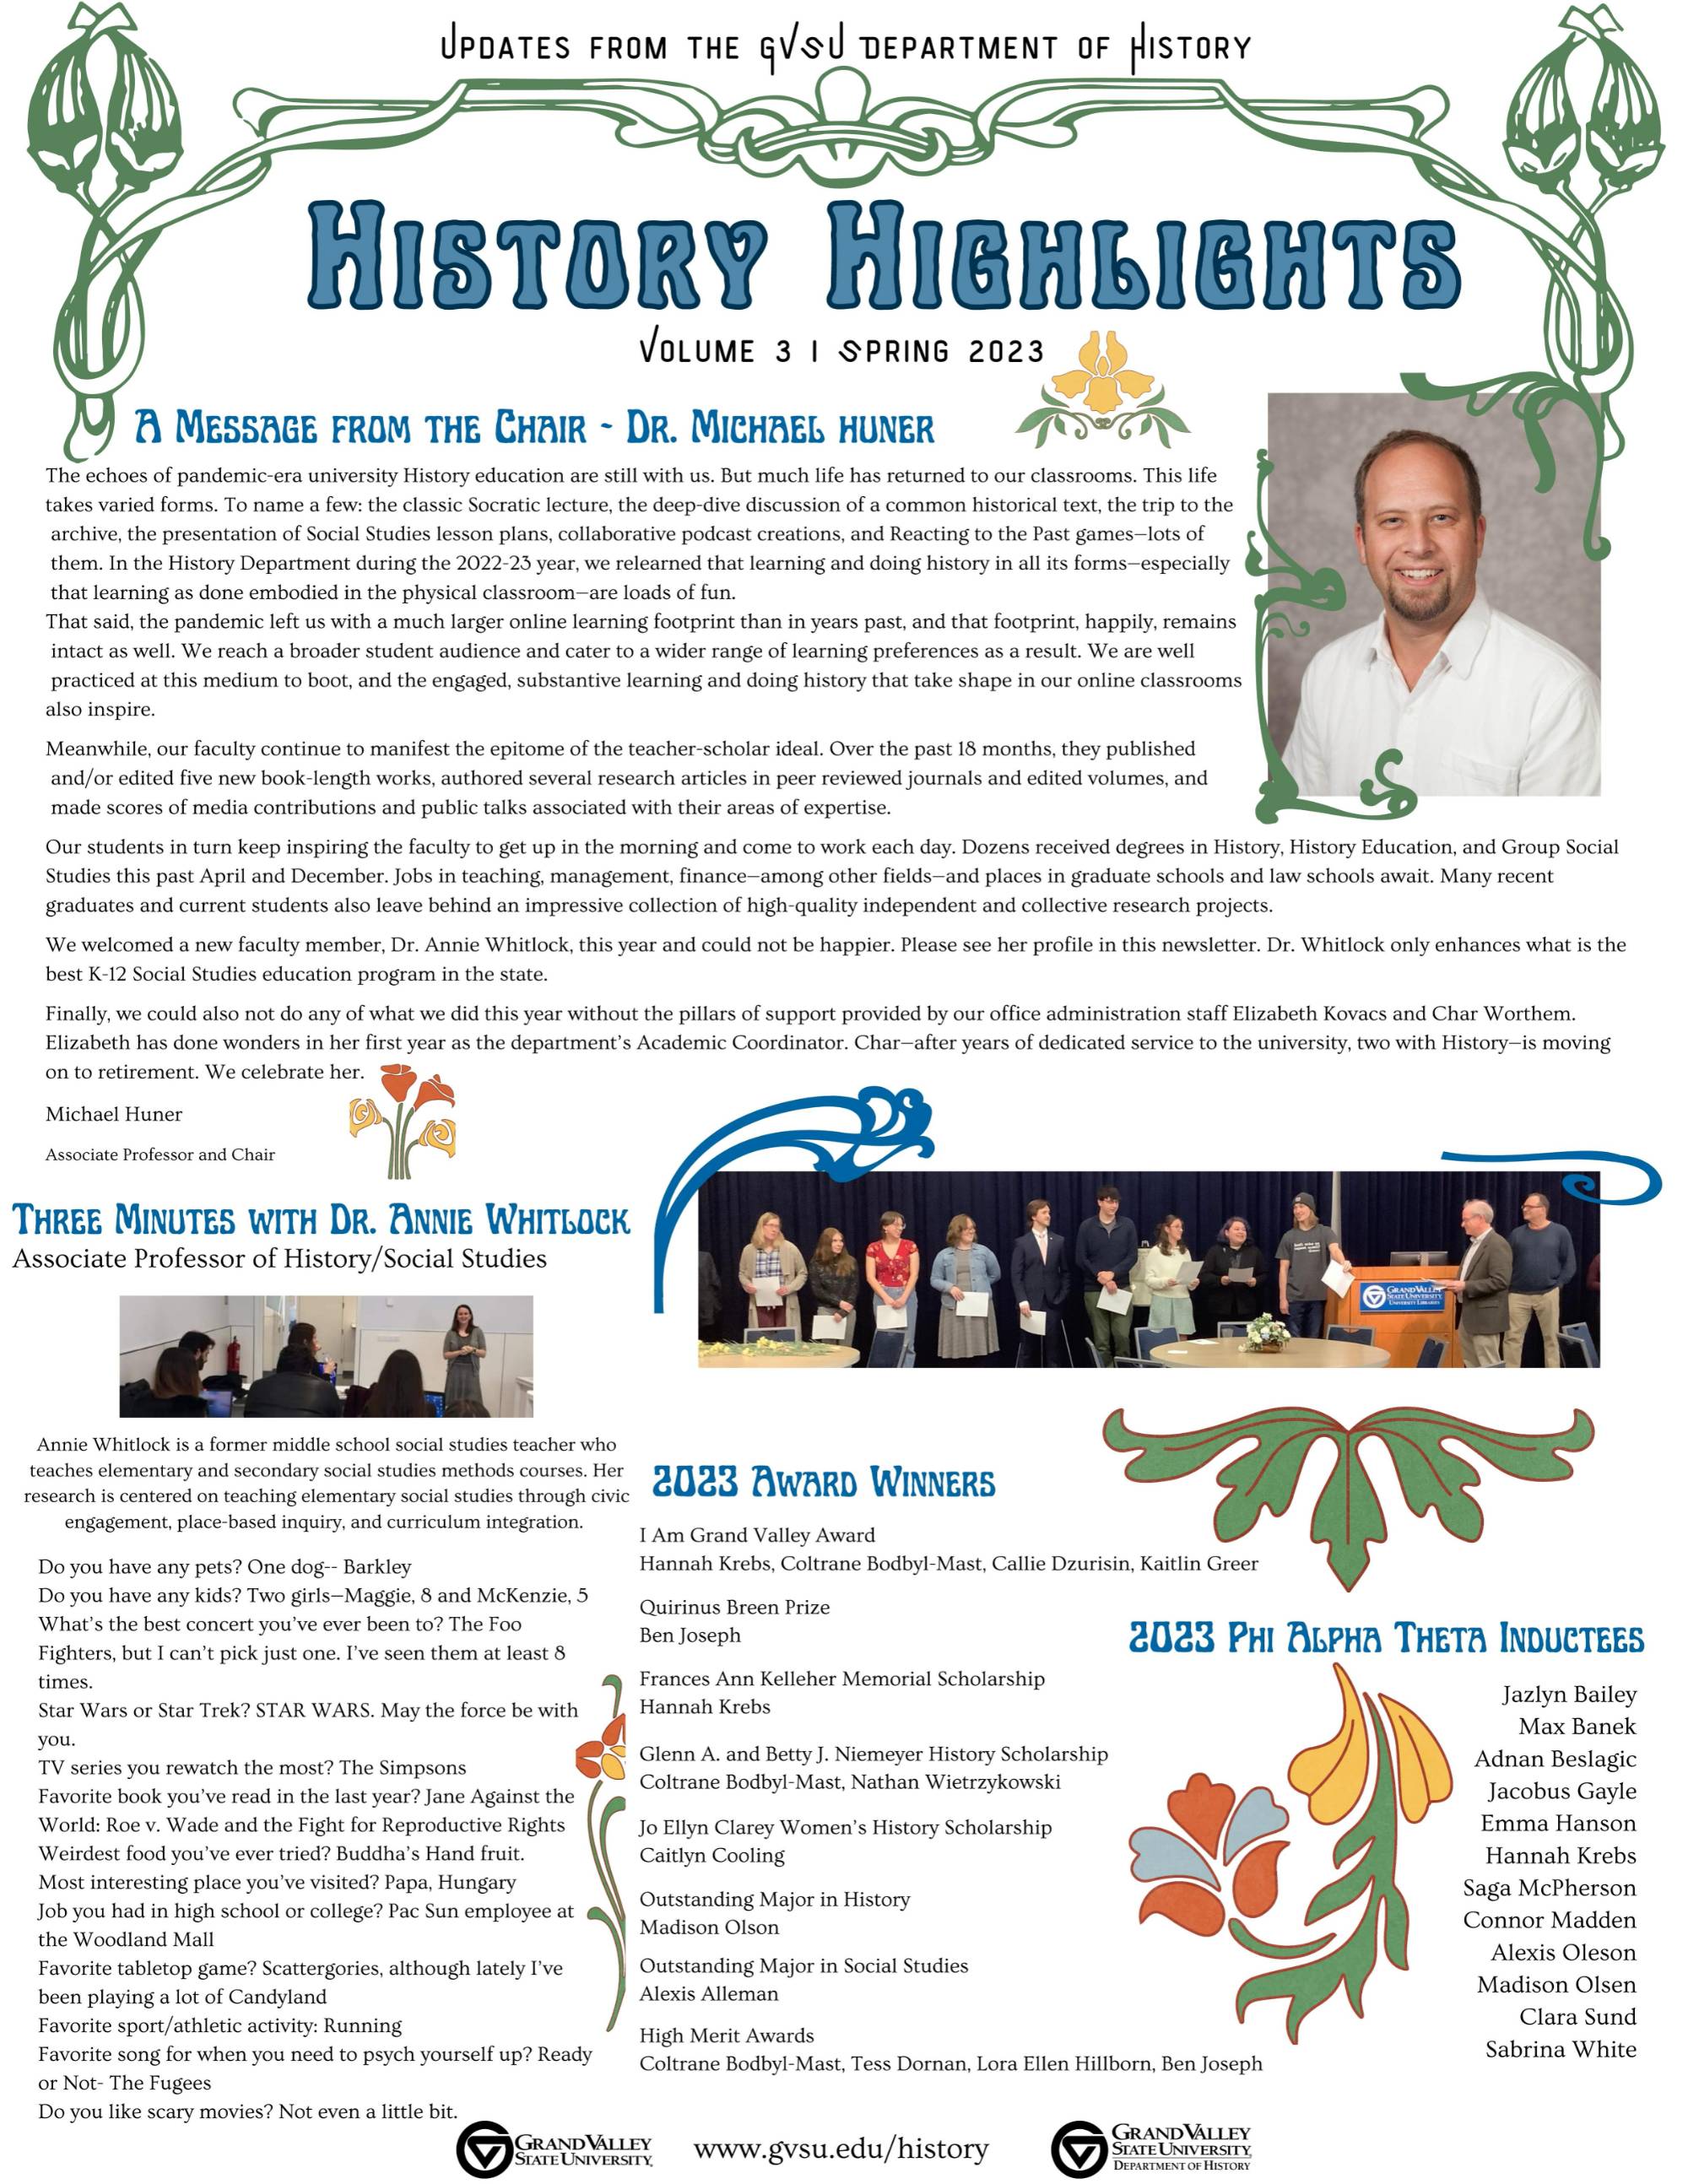 History Highlights Page 1